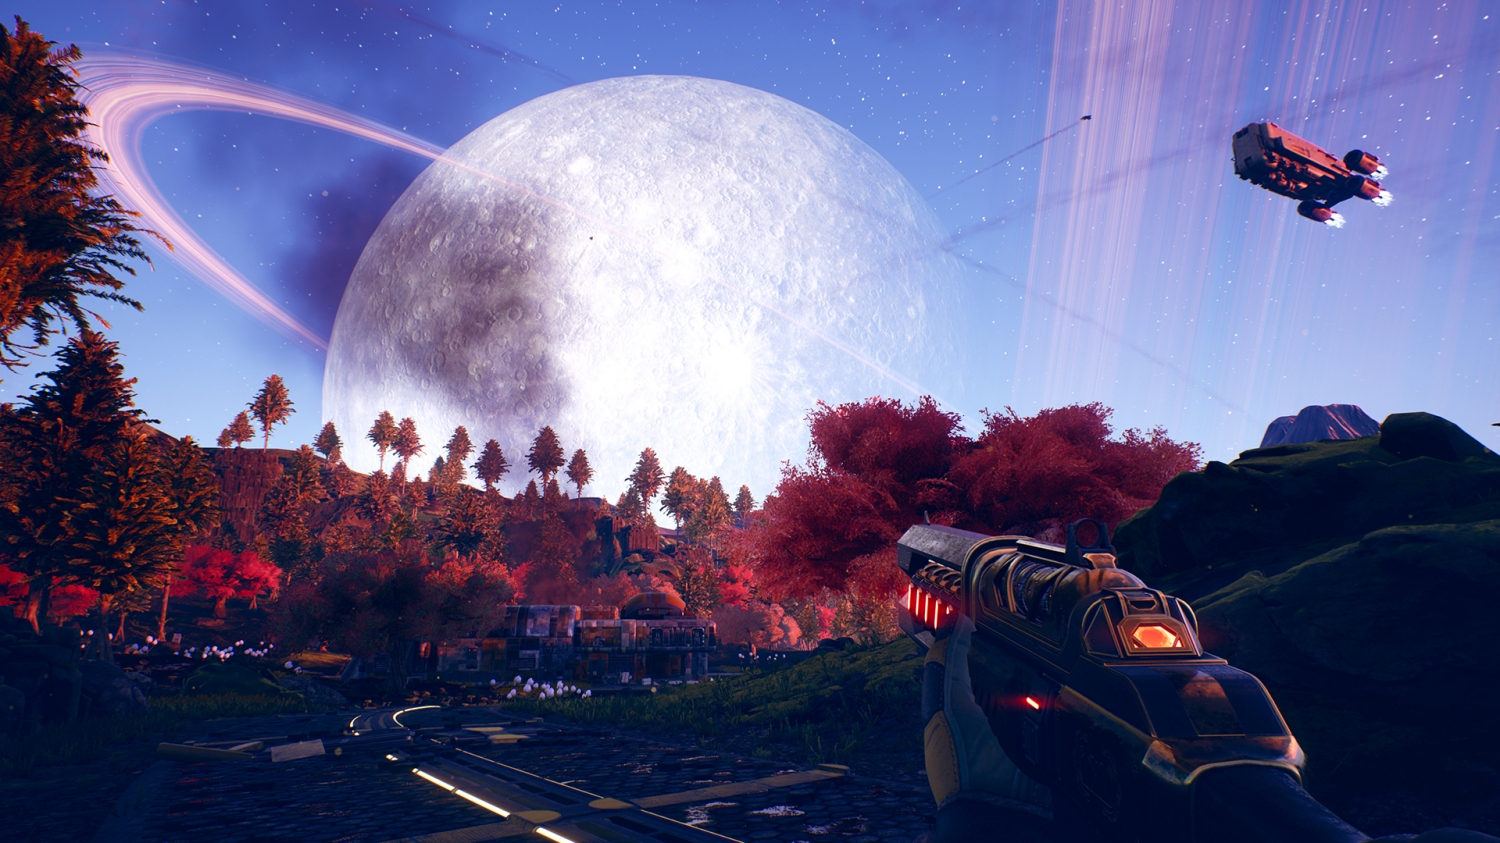 The Outer Worlds 2 - What We Know So Far